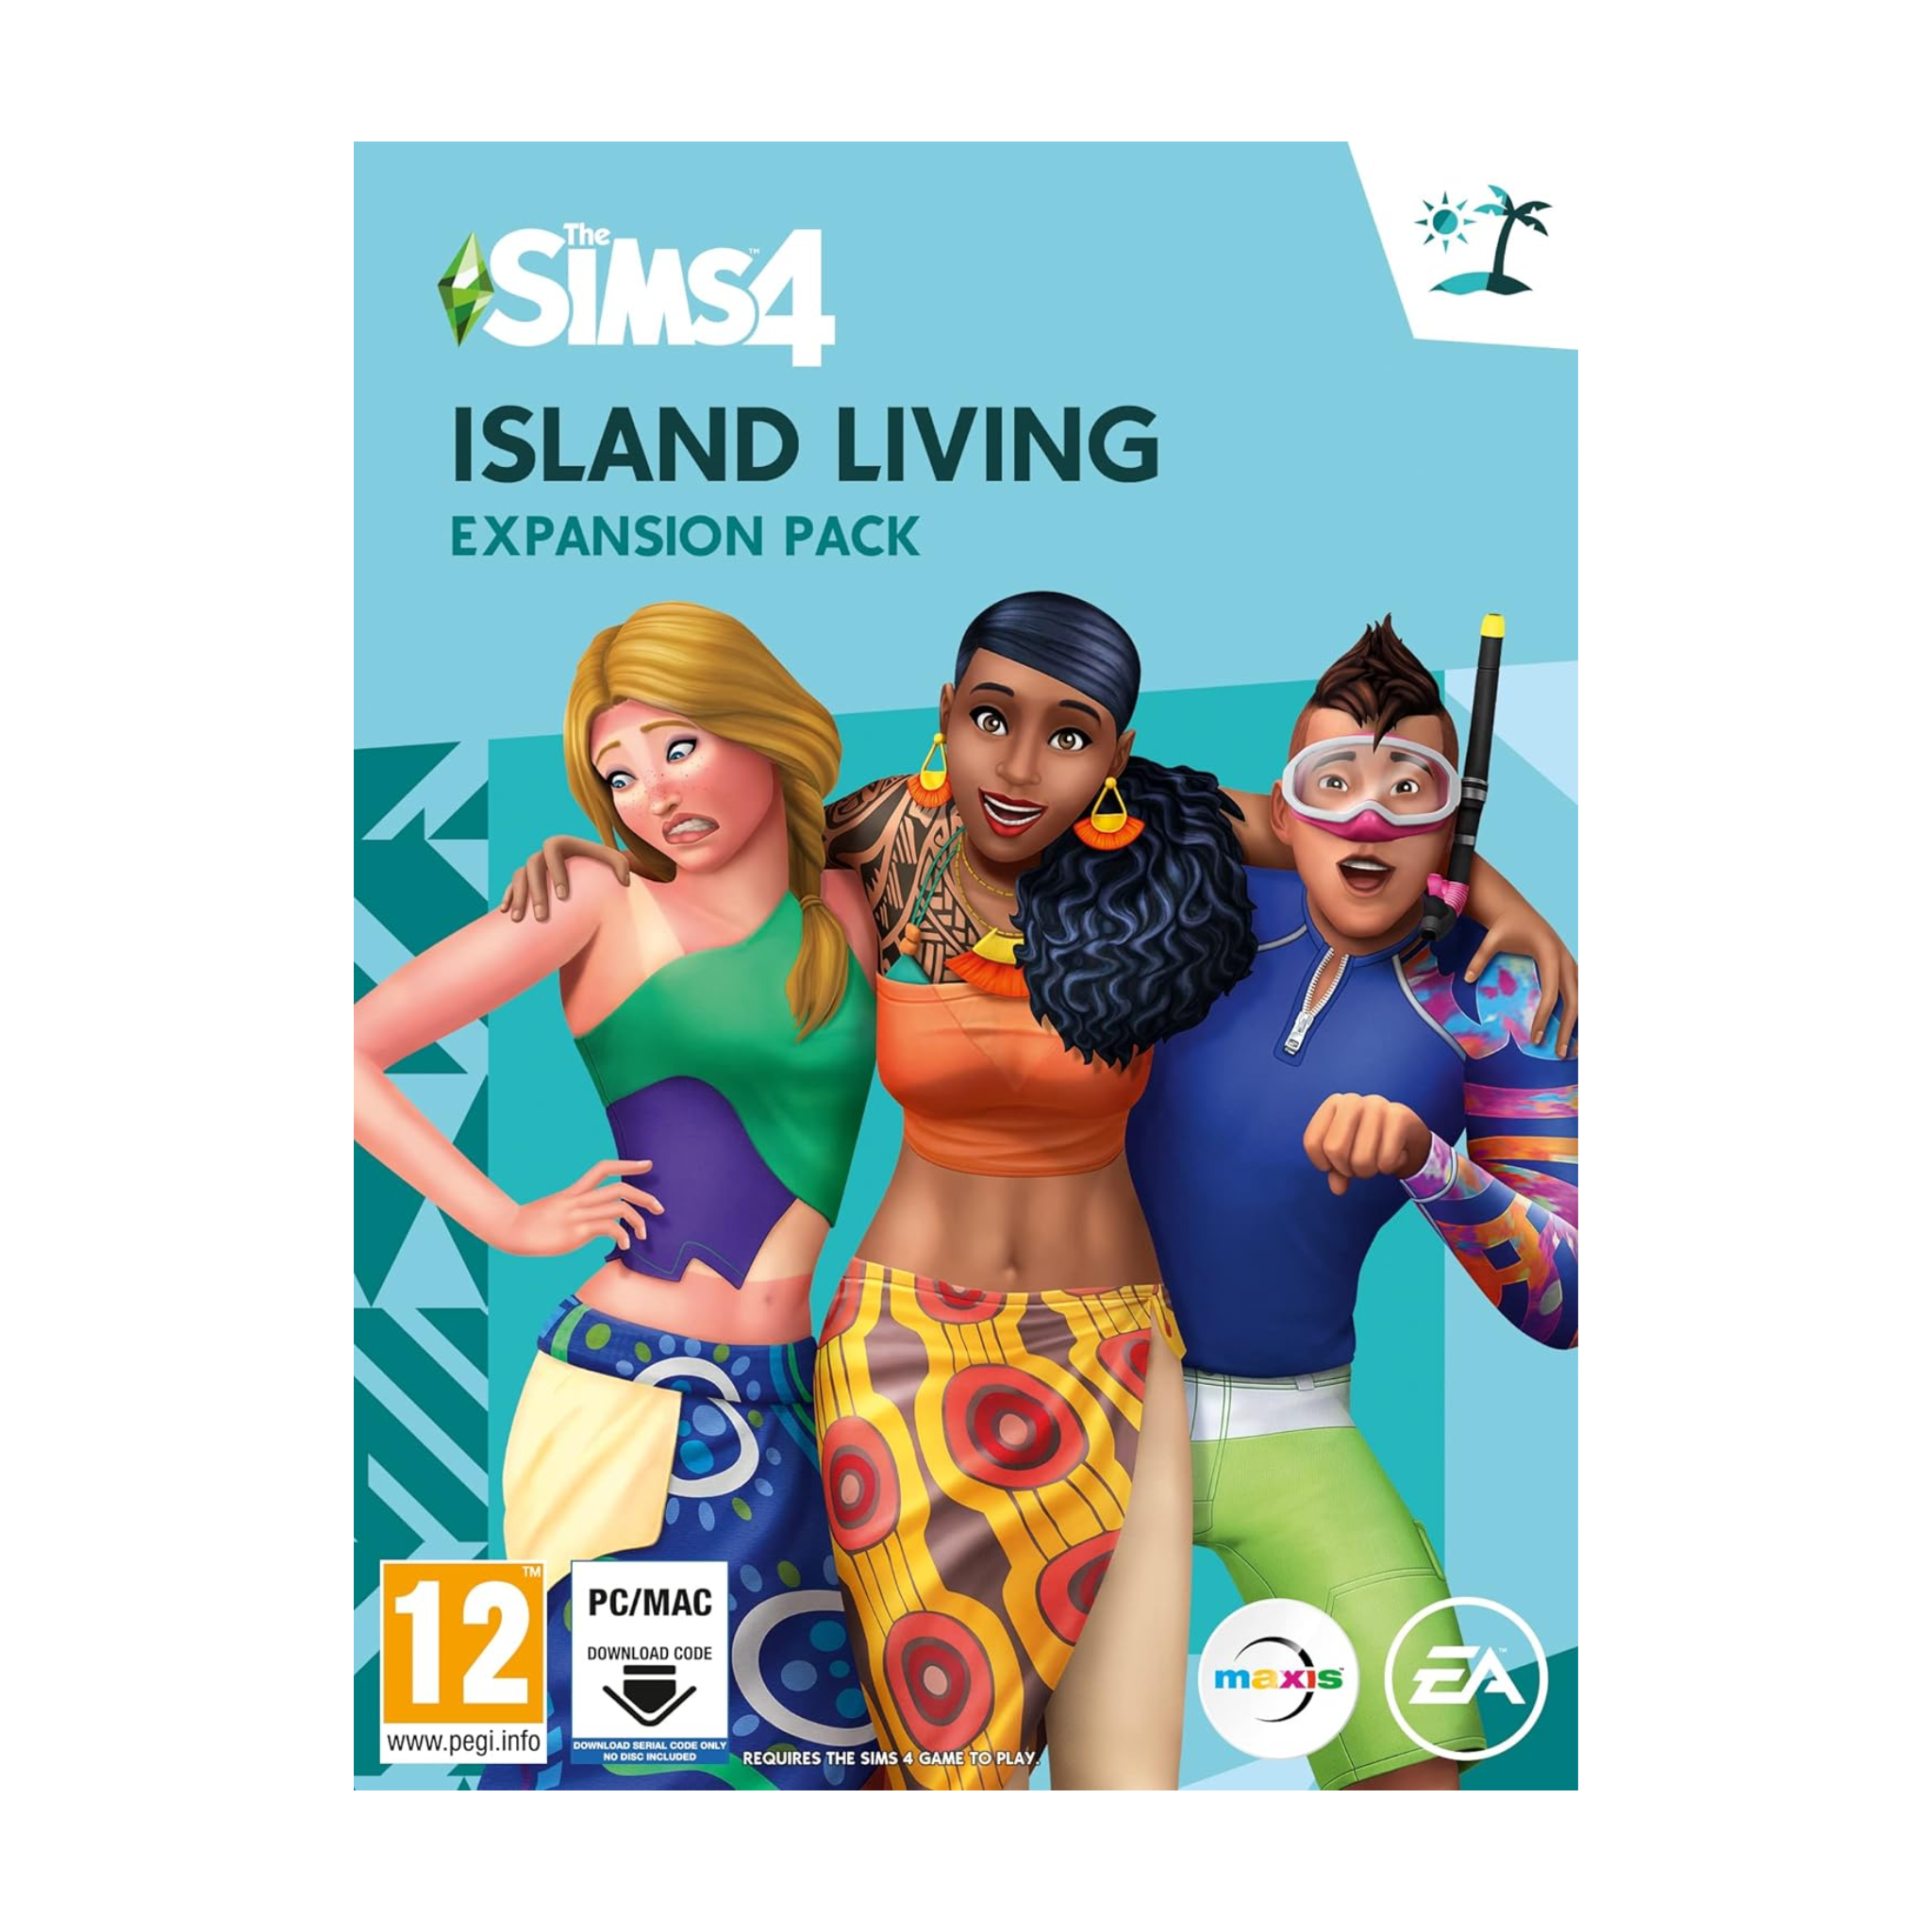 Photos - Game Wzrd tech The Sims 4 island living expansion pack for PC/Mac